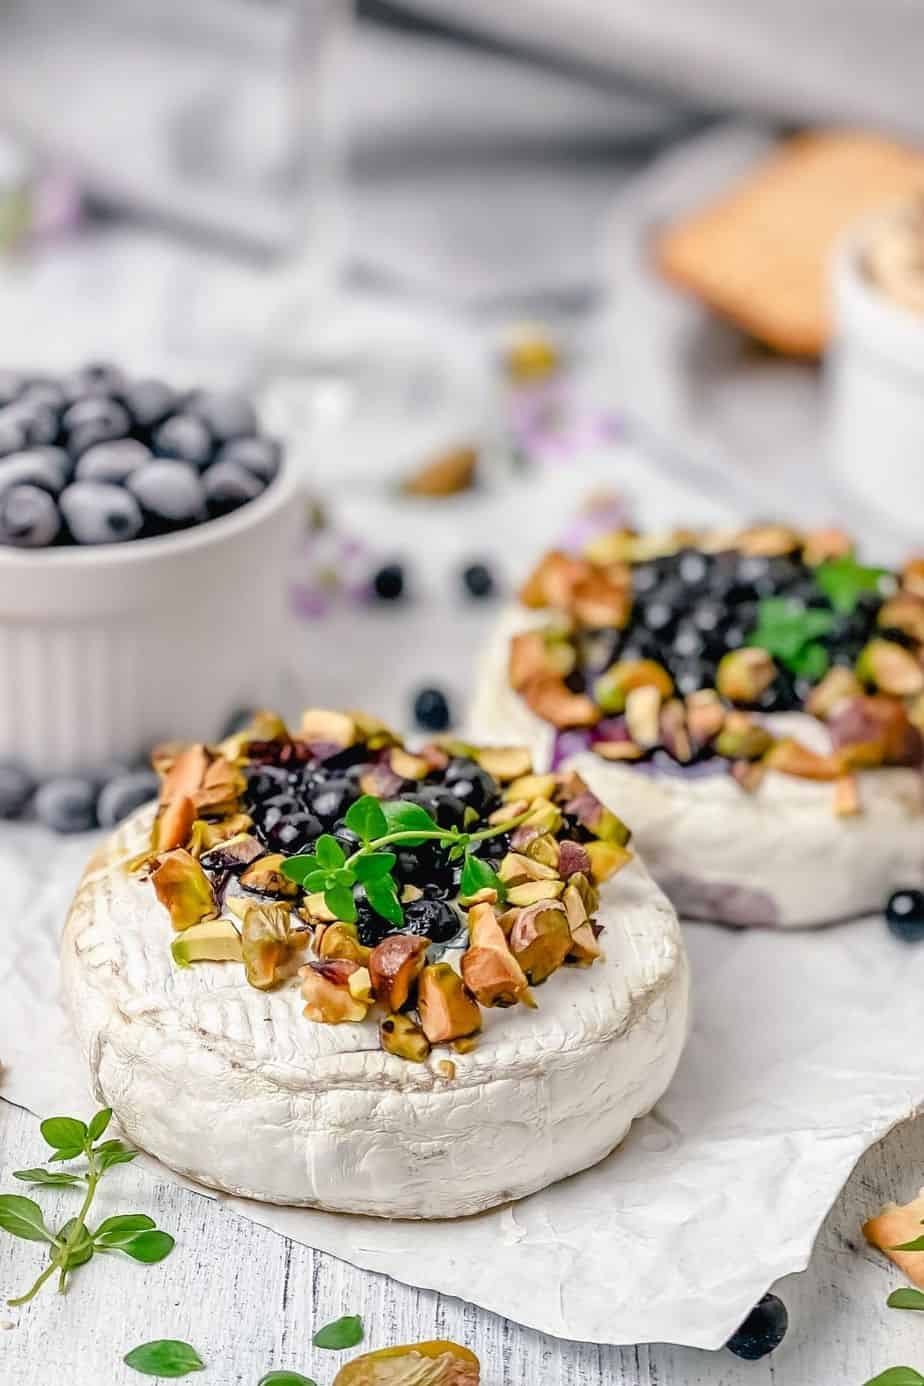 Easiest baked camembert recipe EVER! Camembert cheese topped with thyme sprigs, honey, blueberries and baked until melty perfection. Delicious! The Yummy Bowl